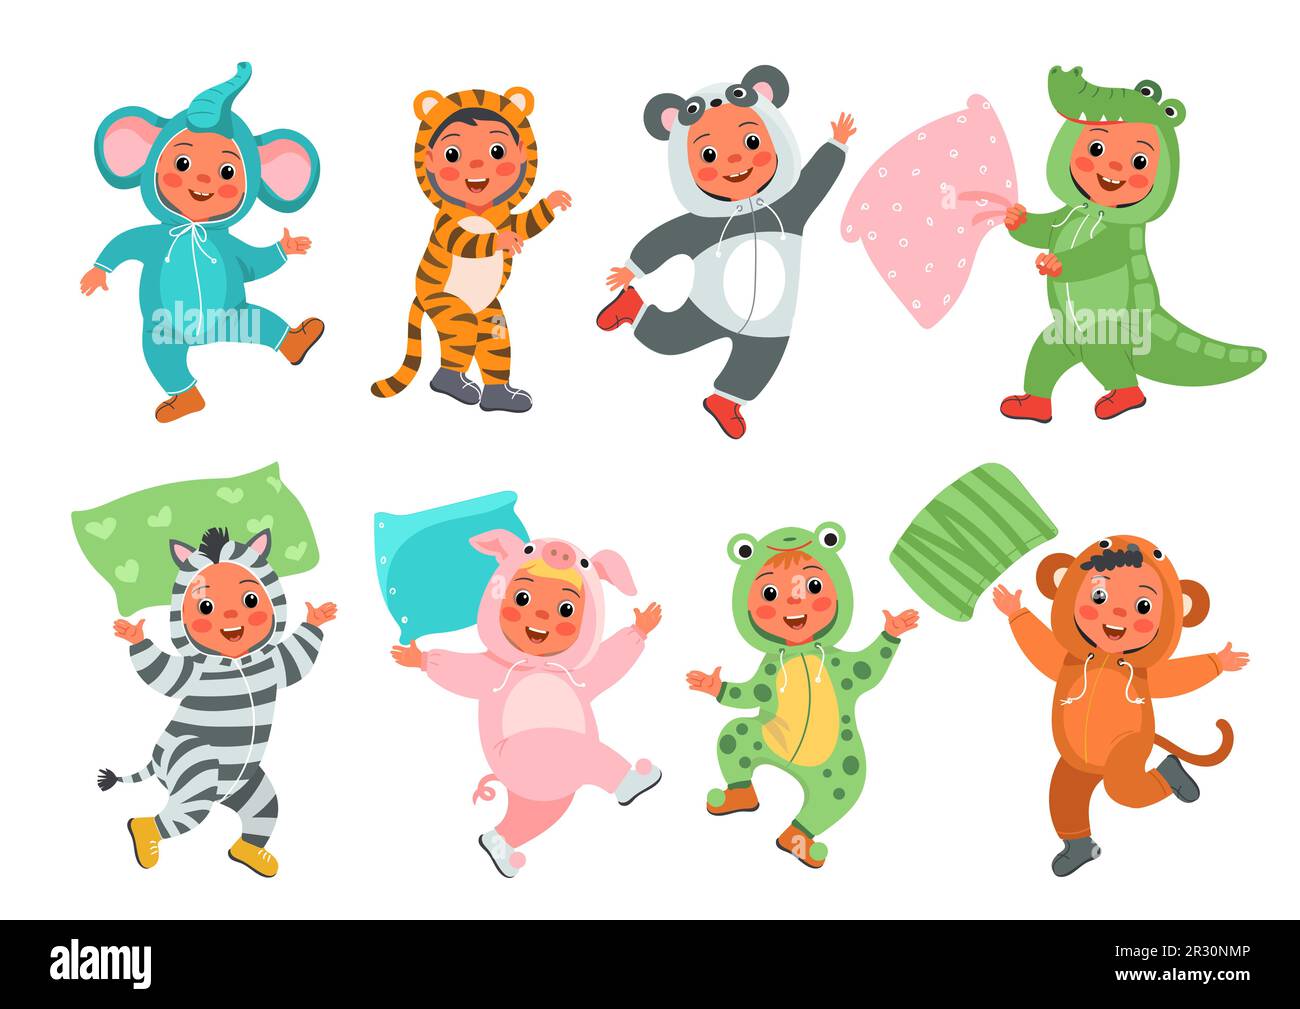 Kids animal pajamas. Funny children in cute nightwear. Sleepover party. Crocodile or elephant outfit. Panda and tiger kigurumi. Pillow fight. Happy Stock Vector